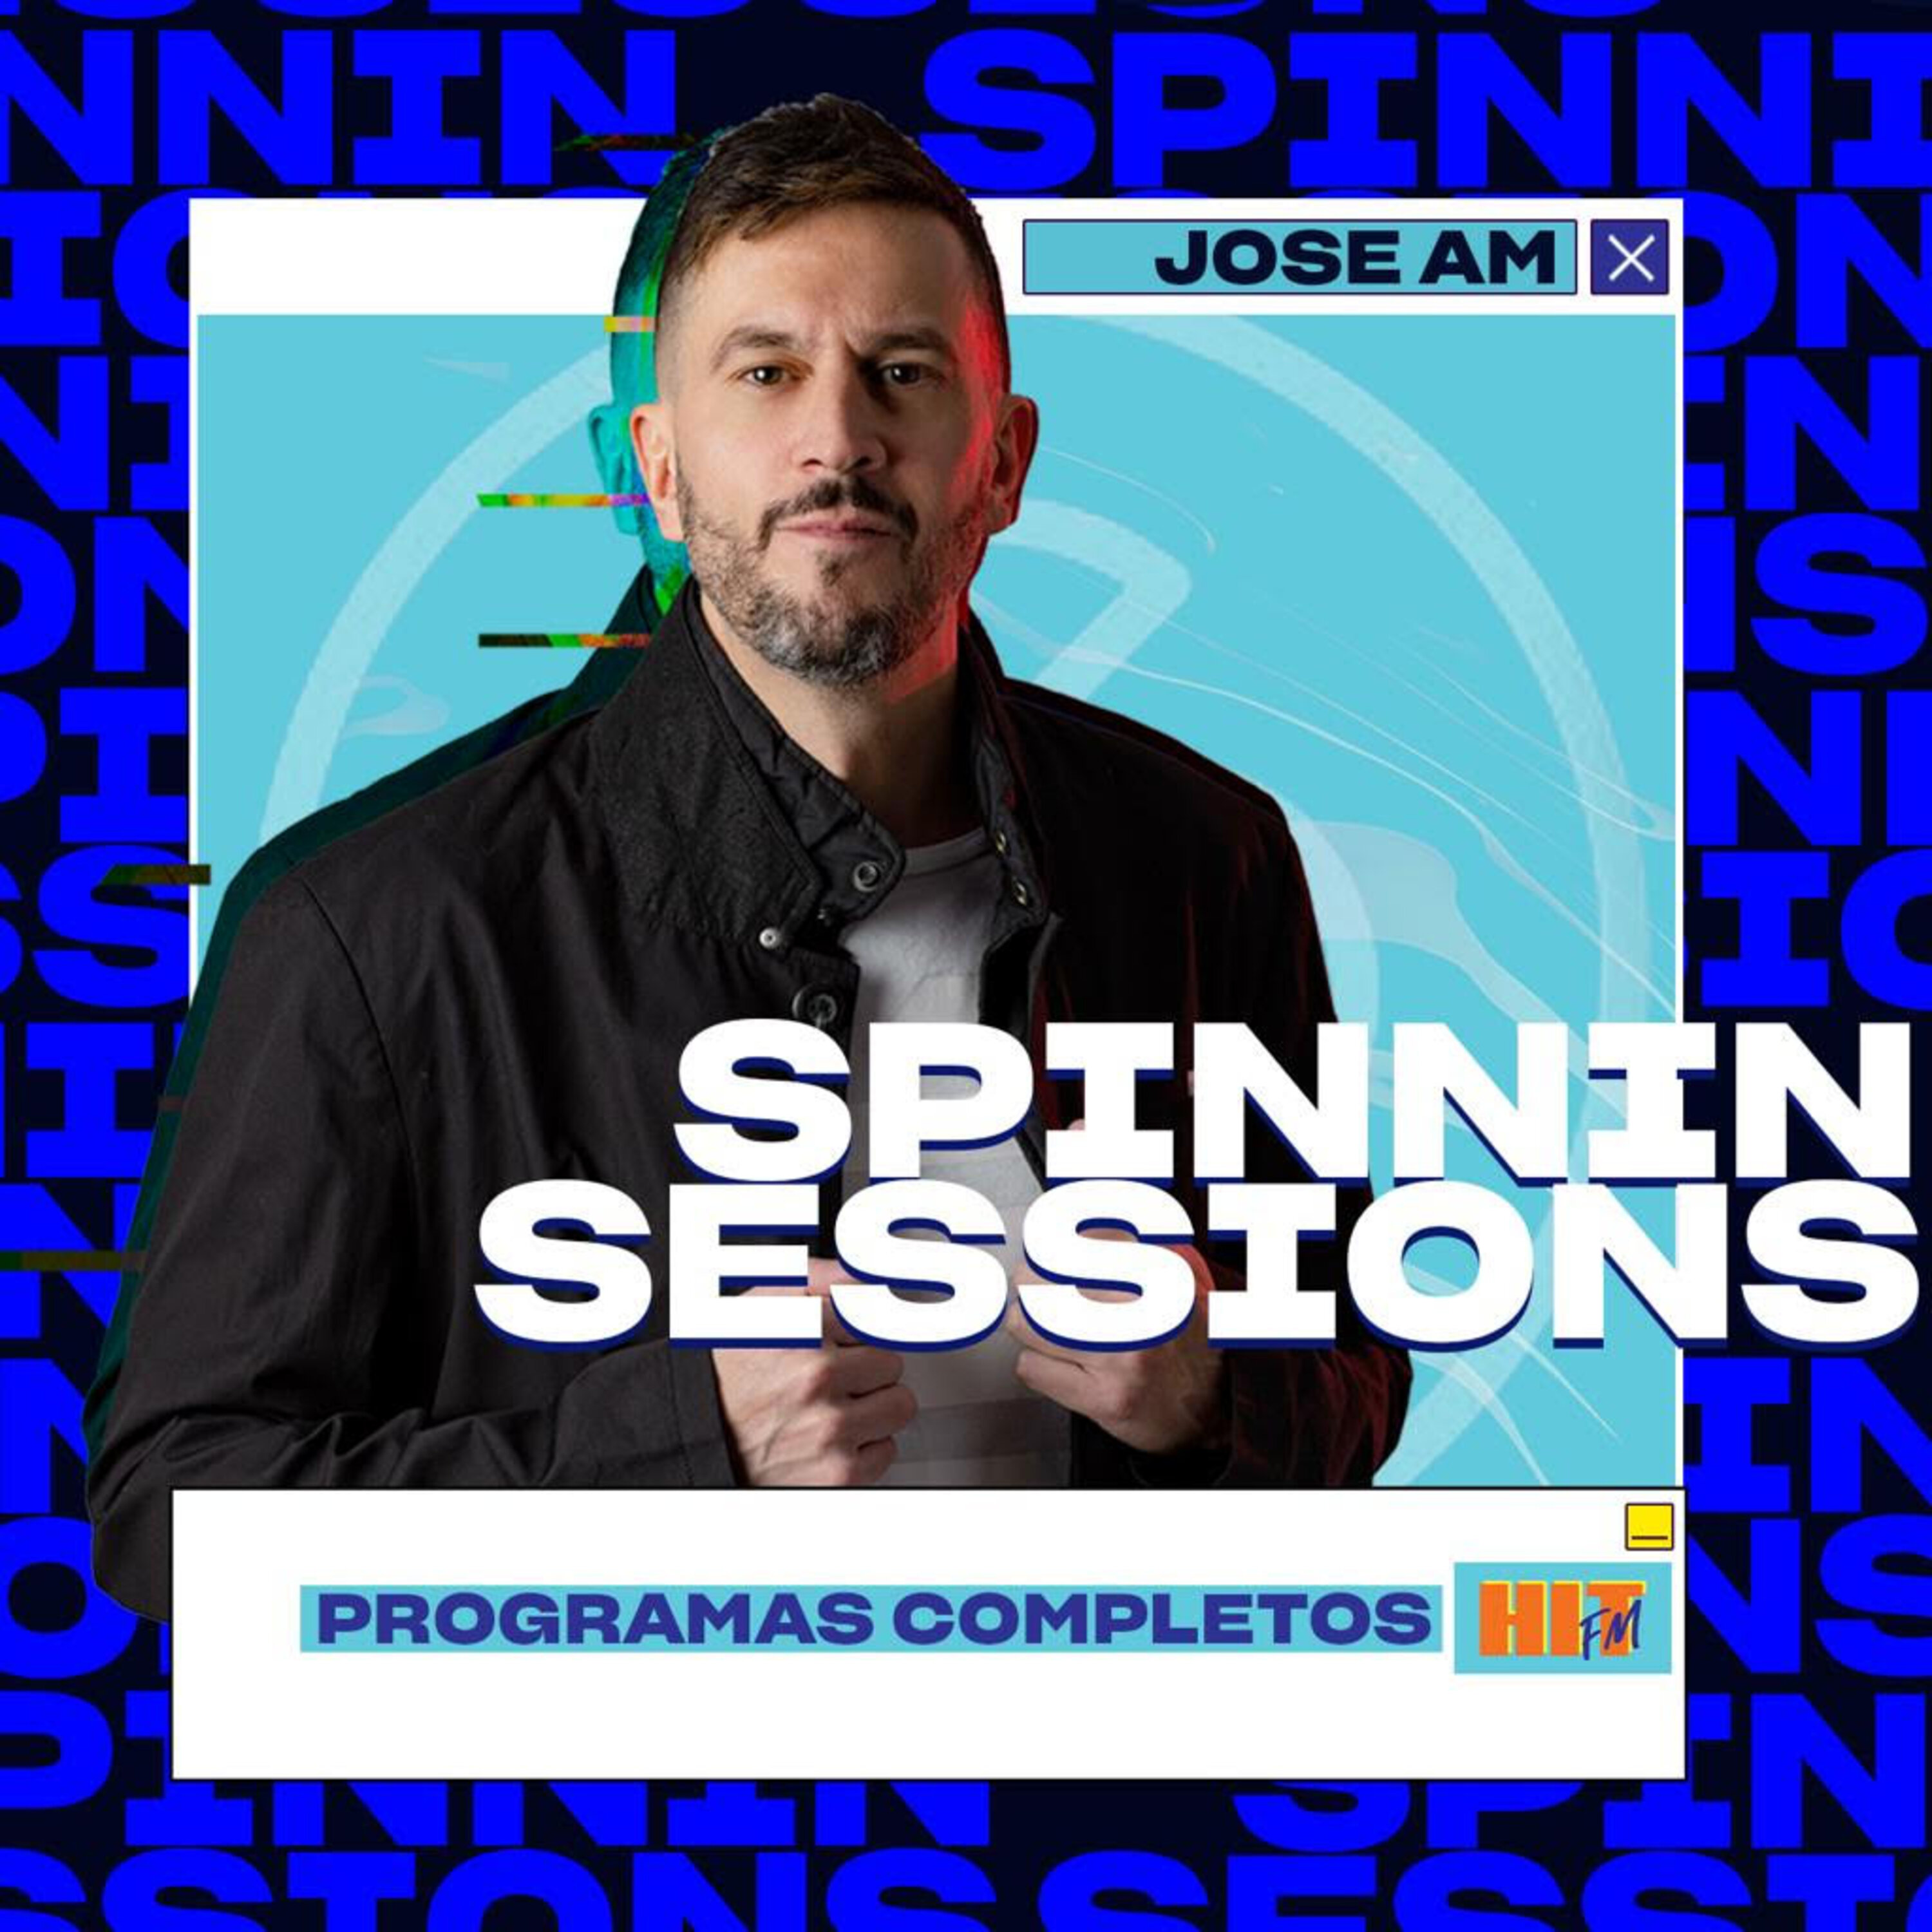 Spinnin Sessions con Jose AM (14/11/2021)